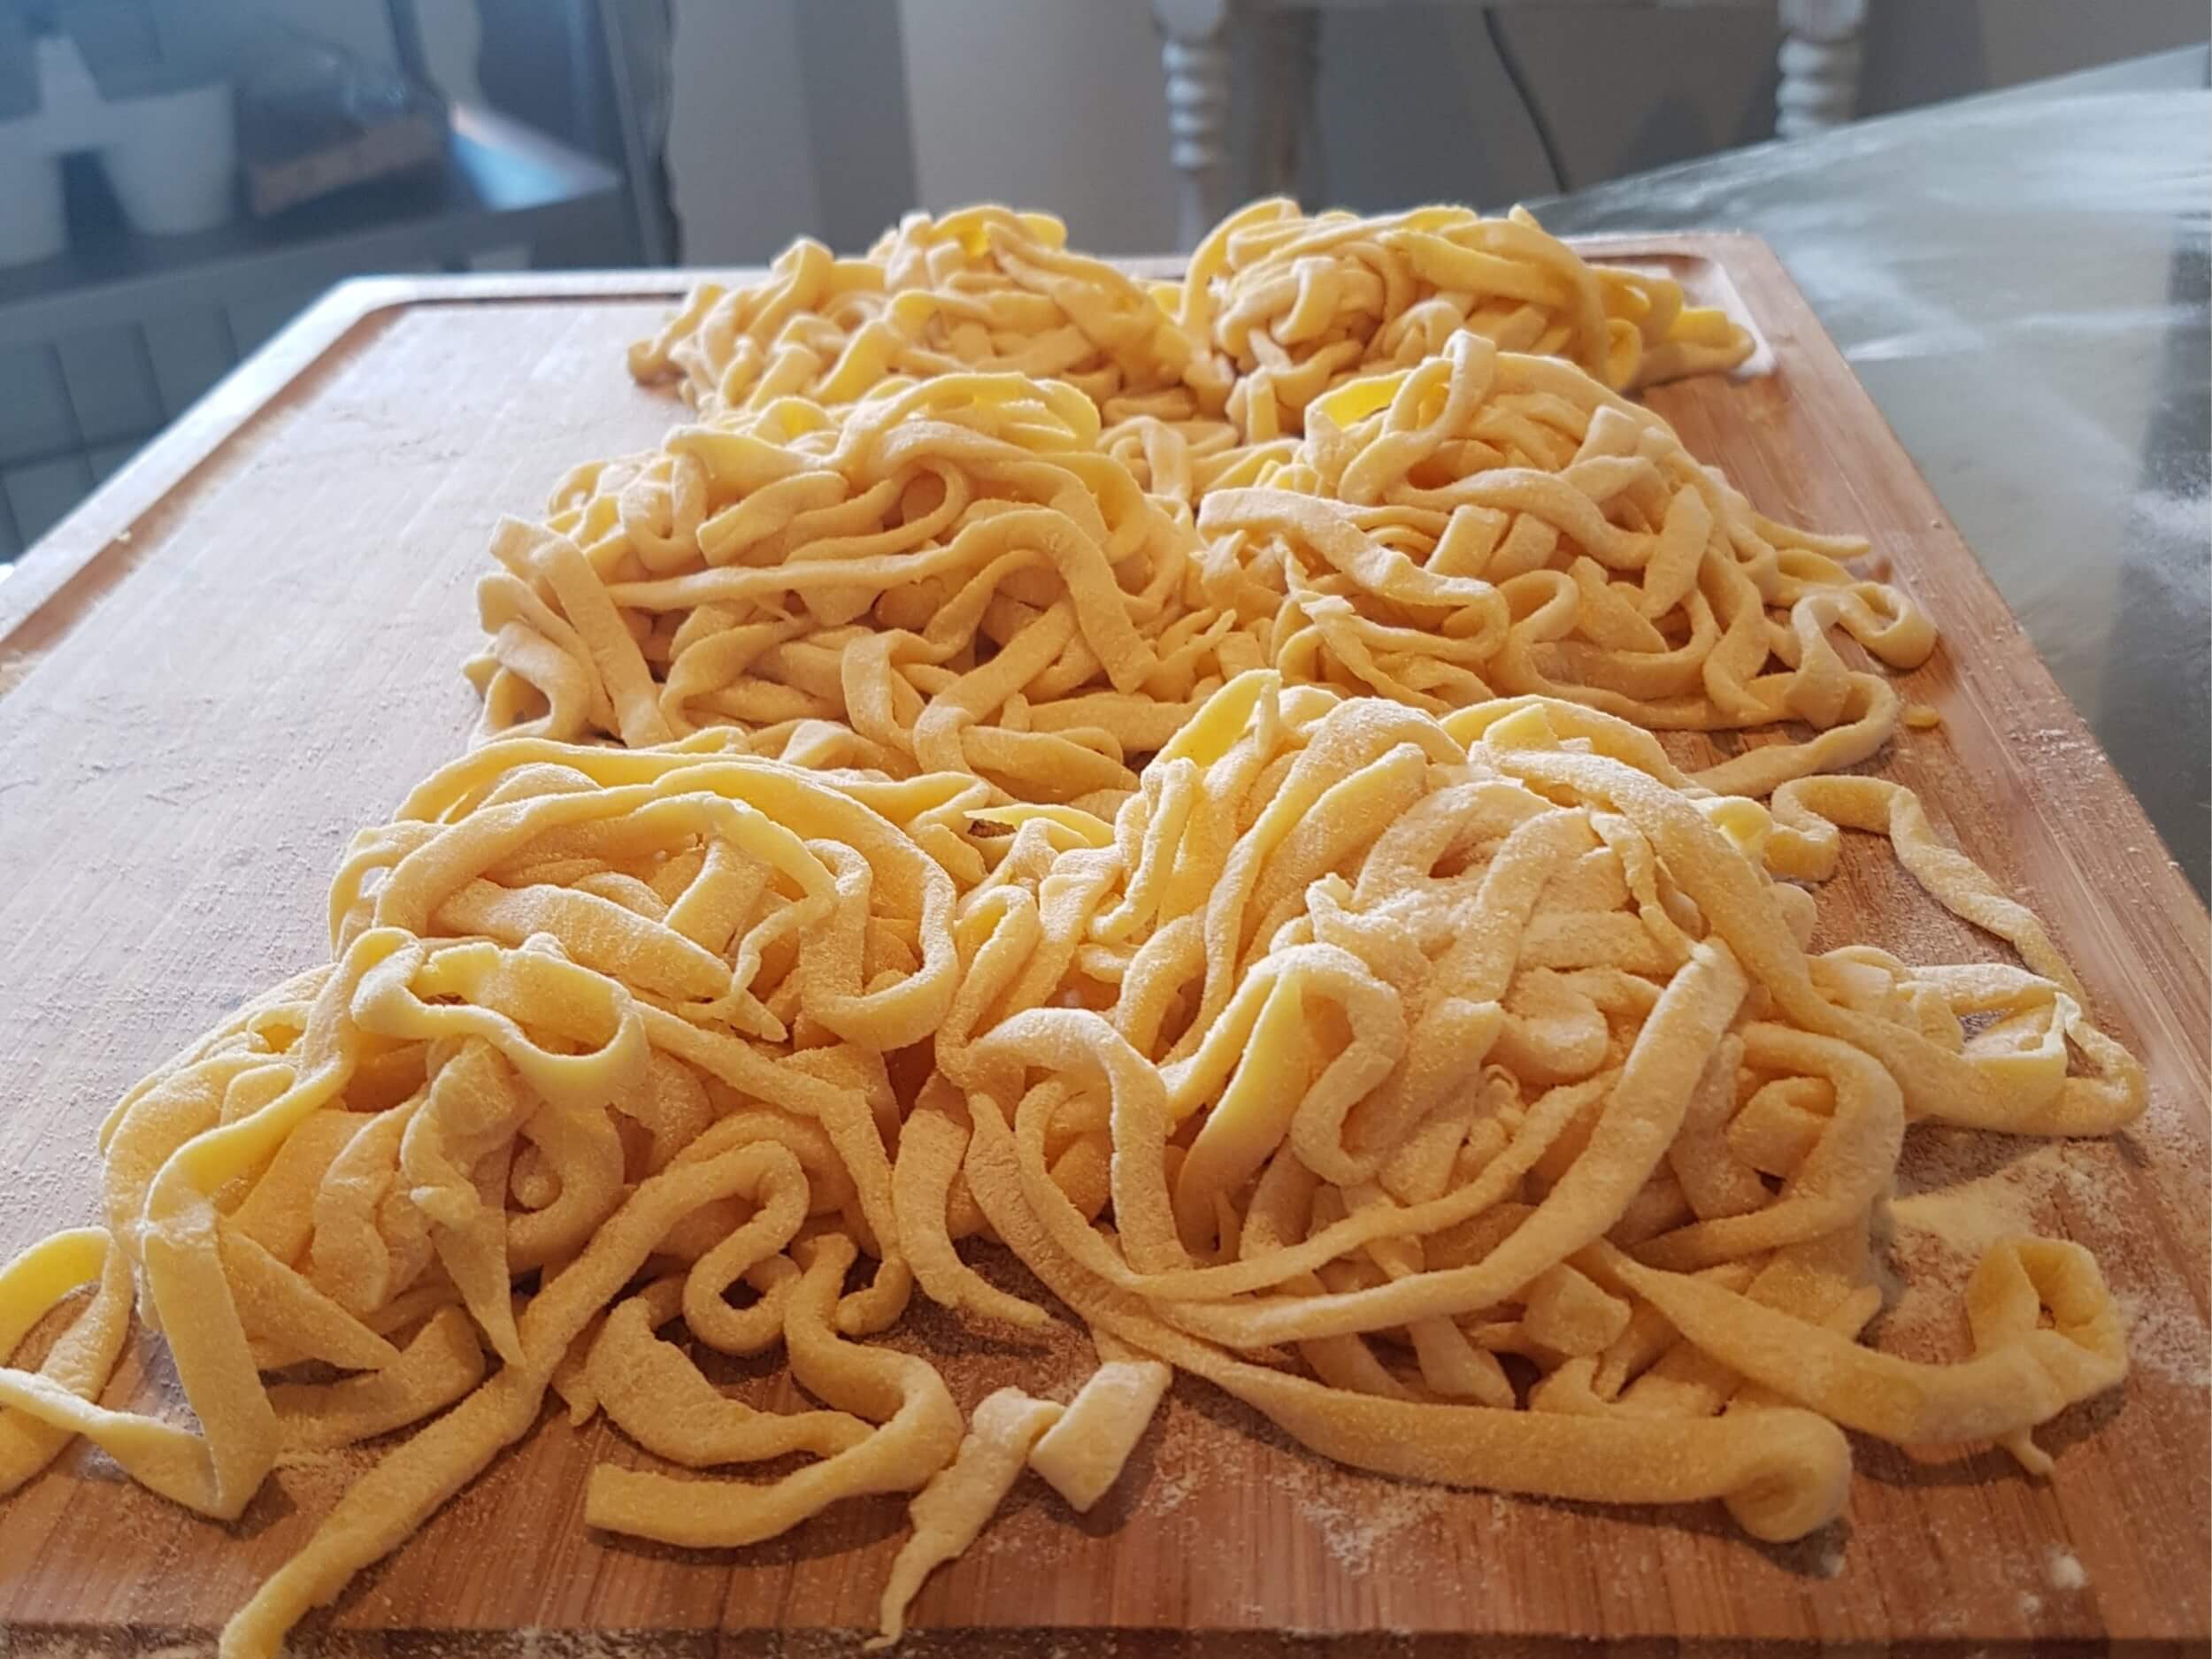 How to cook and boil pasta - Food tour